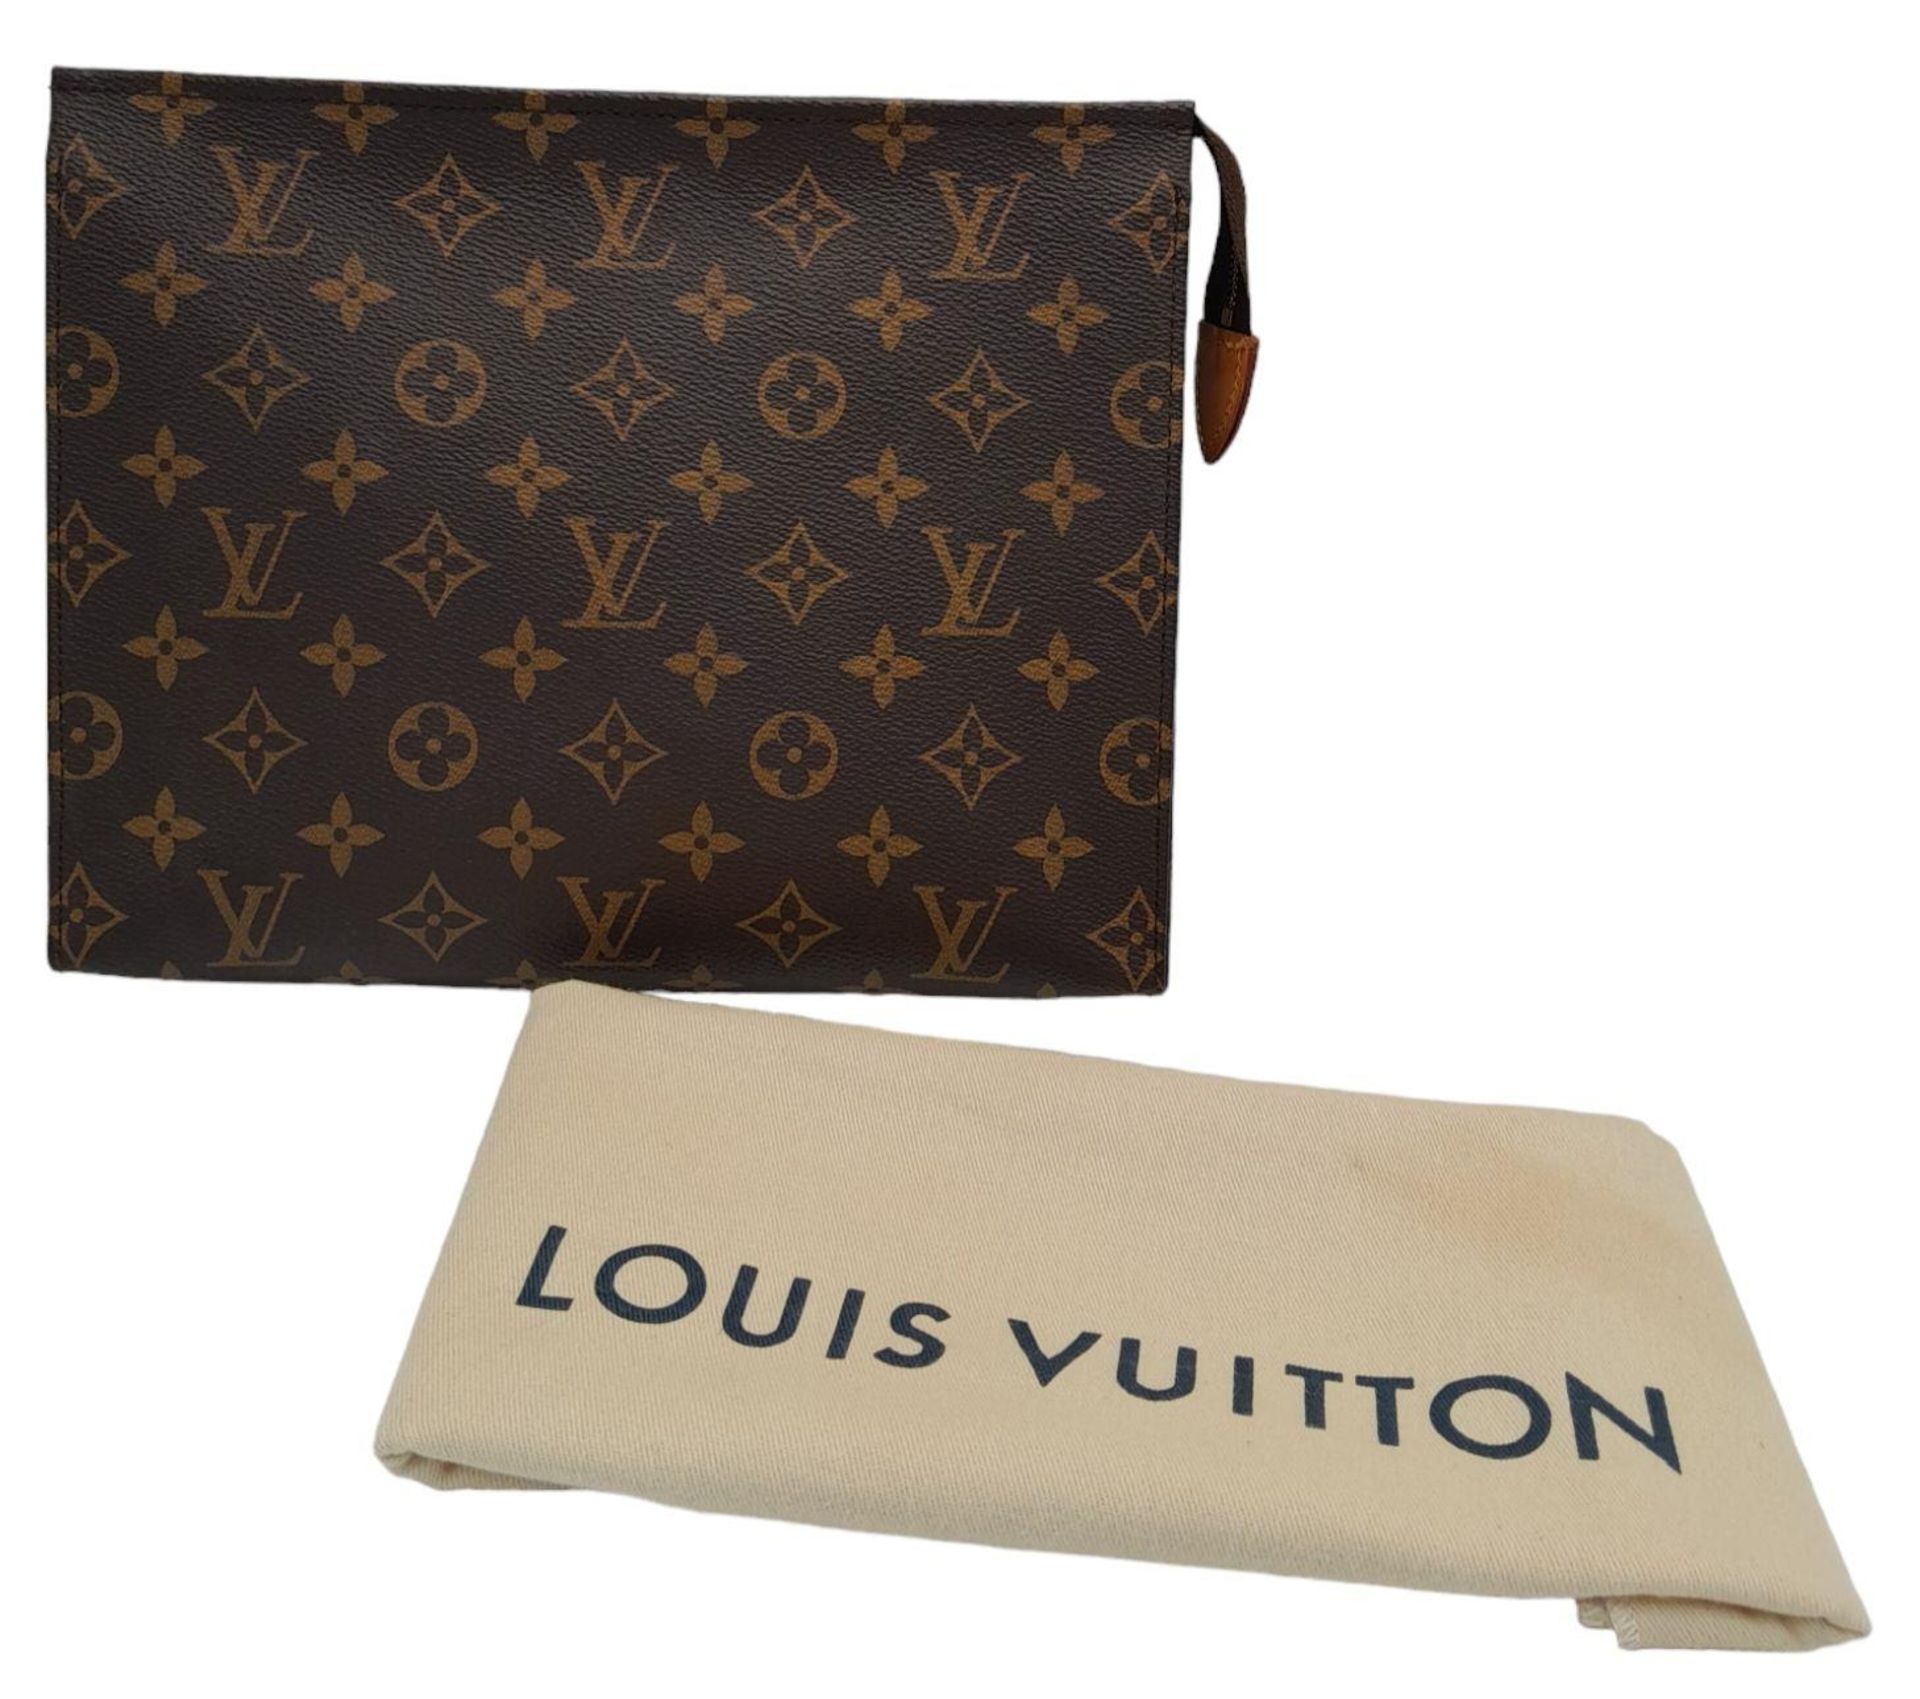 A Louis Vuitton Toiletries Pouch. Monogramed canvas exterior with gold-toned hardware and zipped top - Image 9 of 9